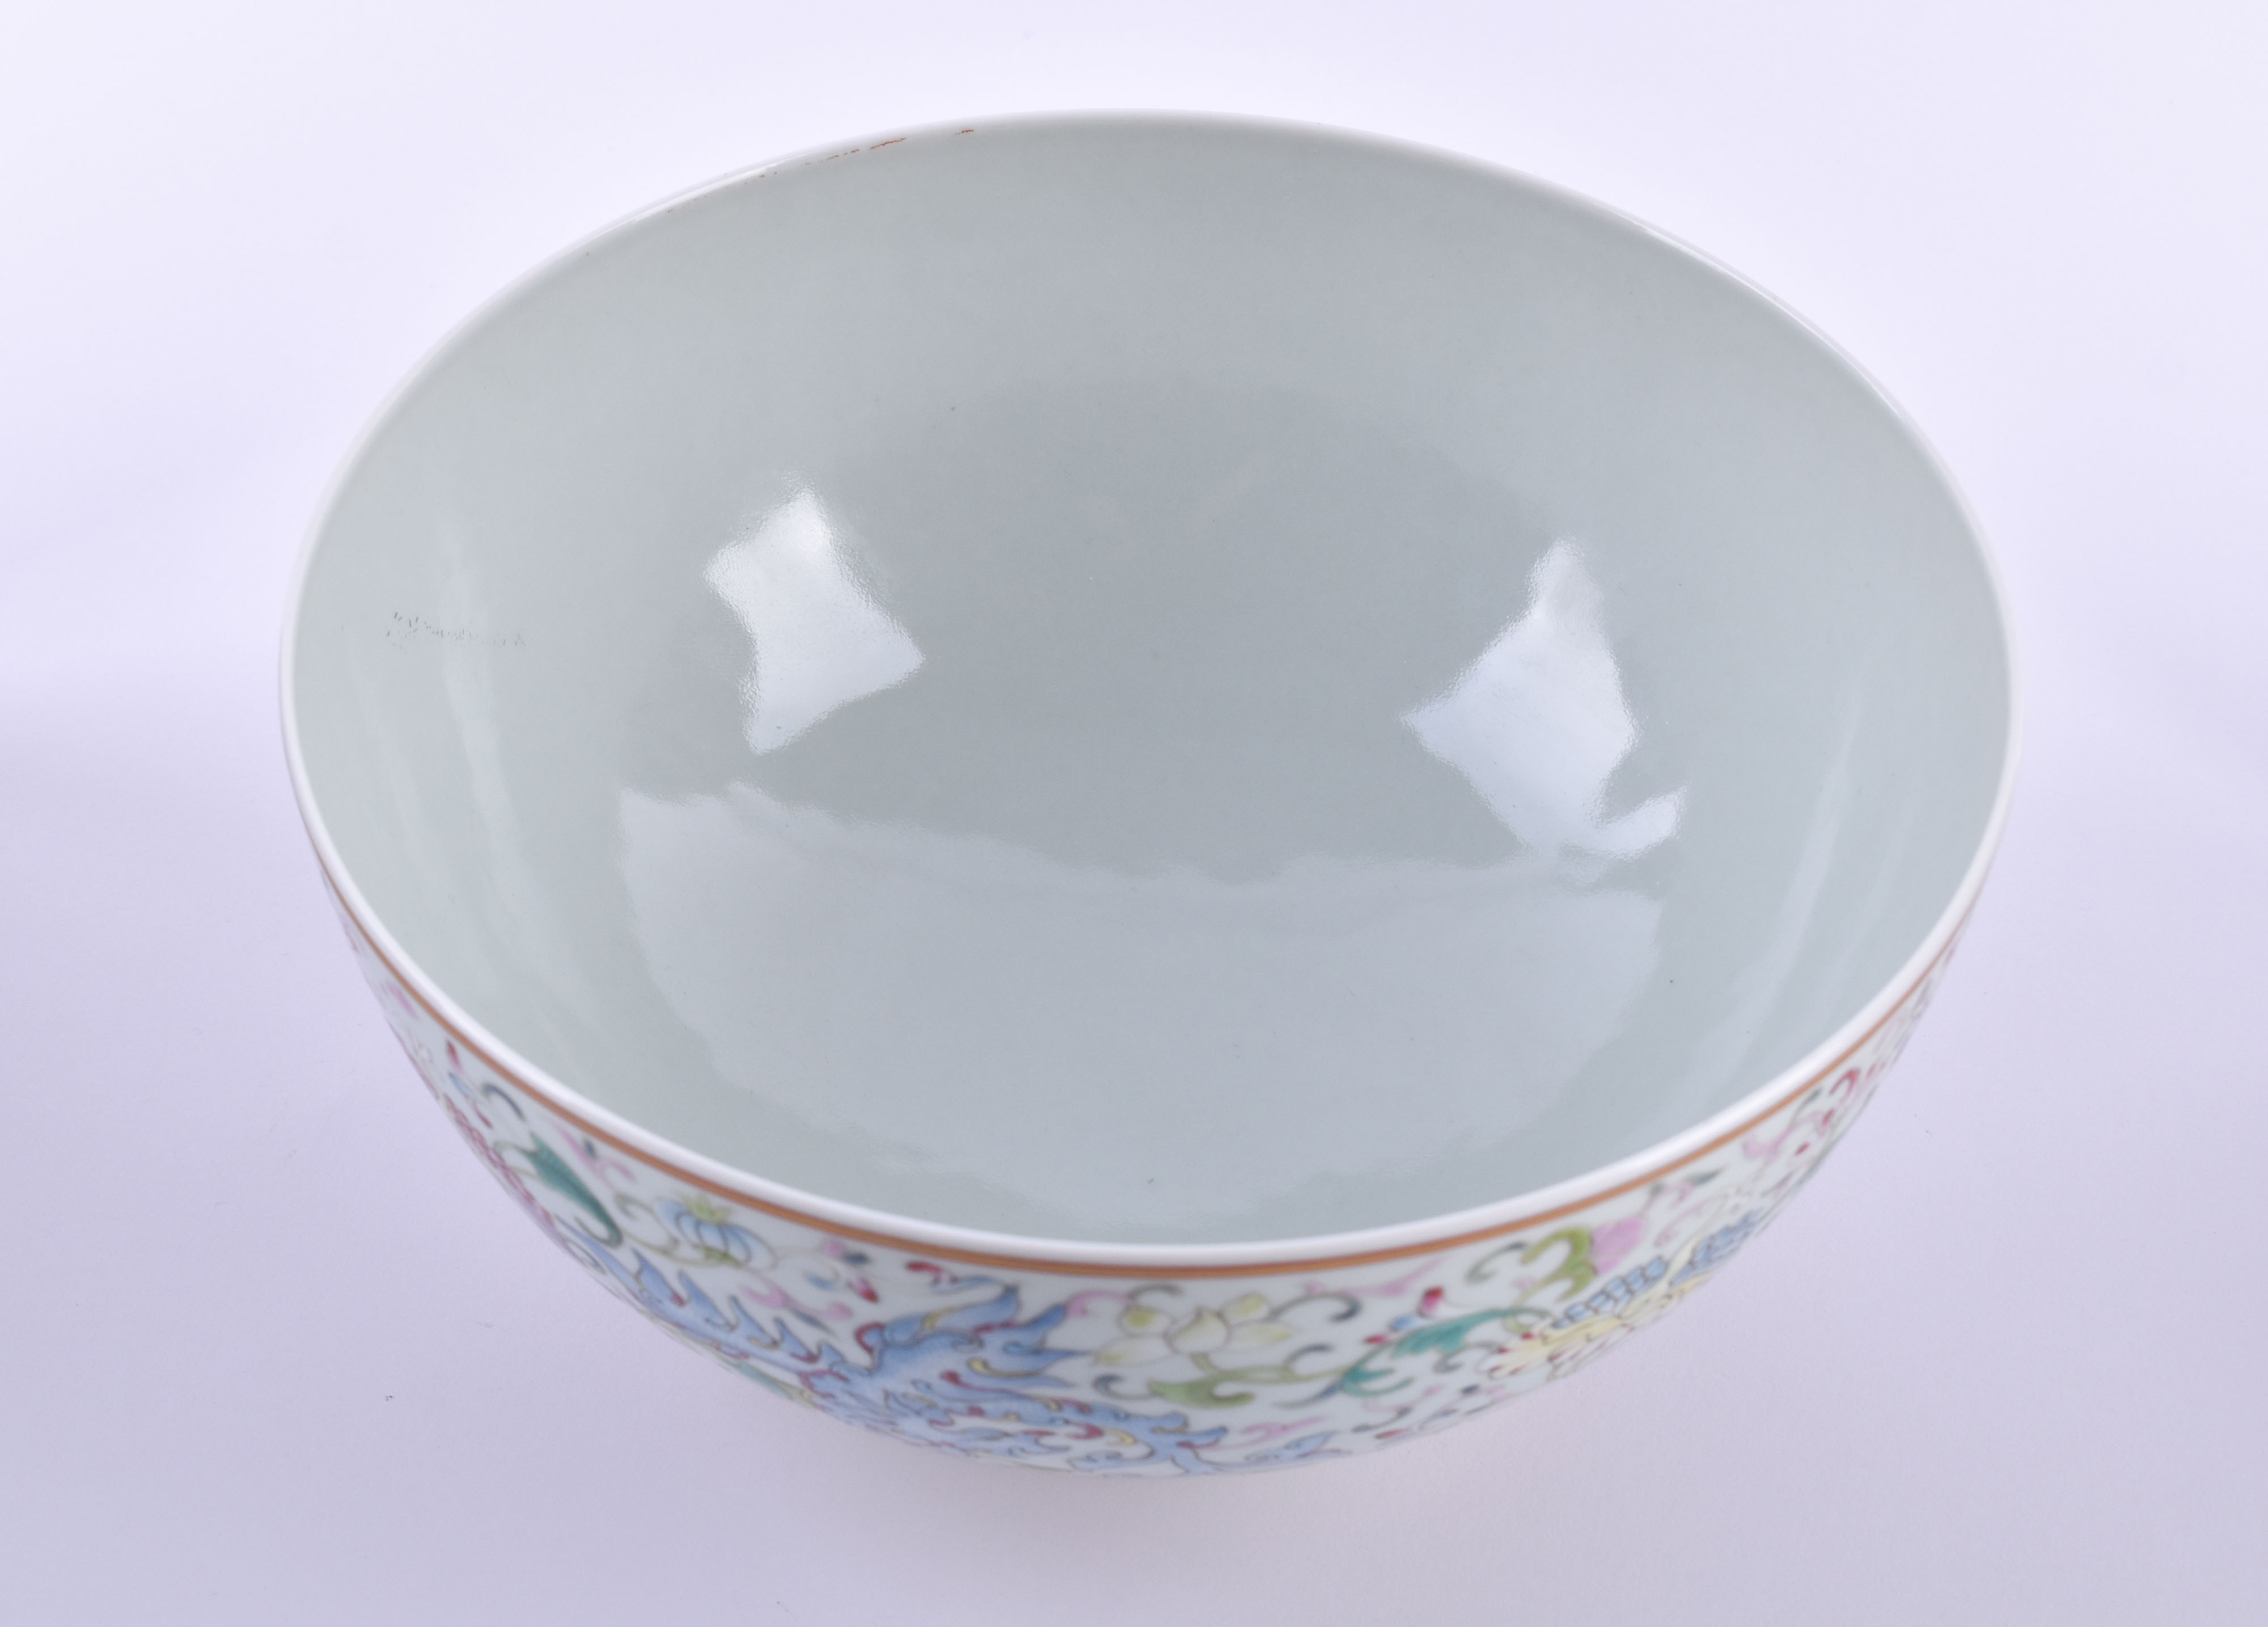  Famille Rose bowl China Qing dynasty - Image 8 of 10